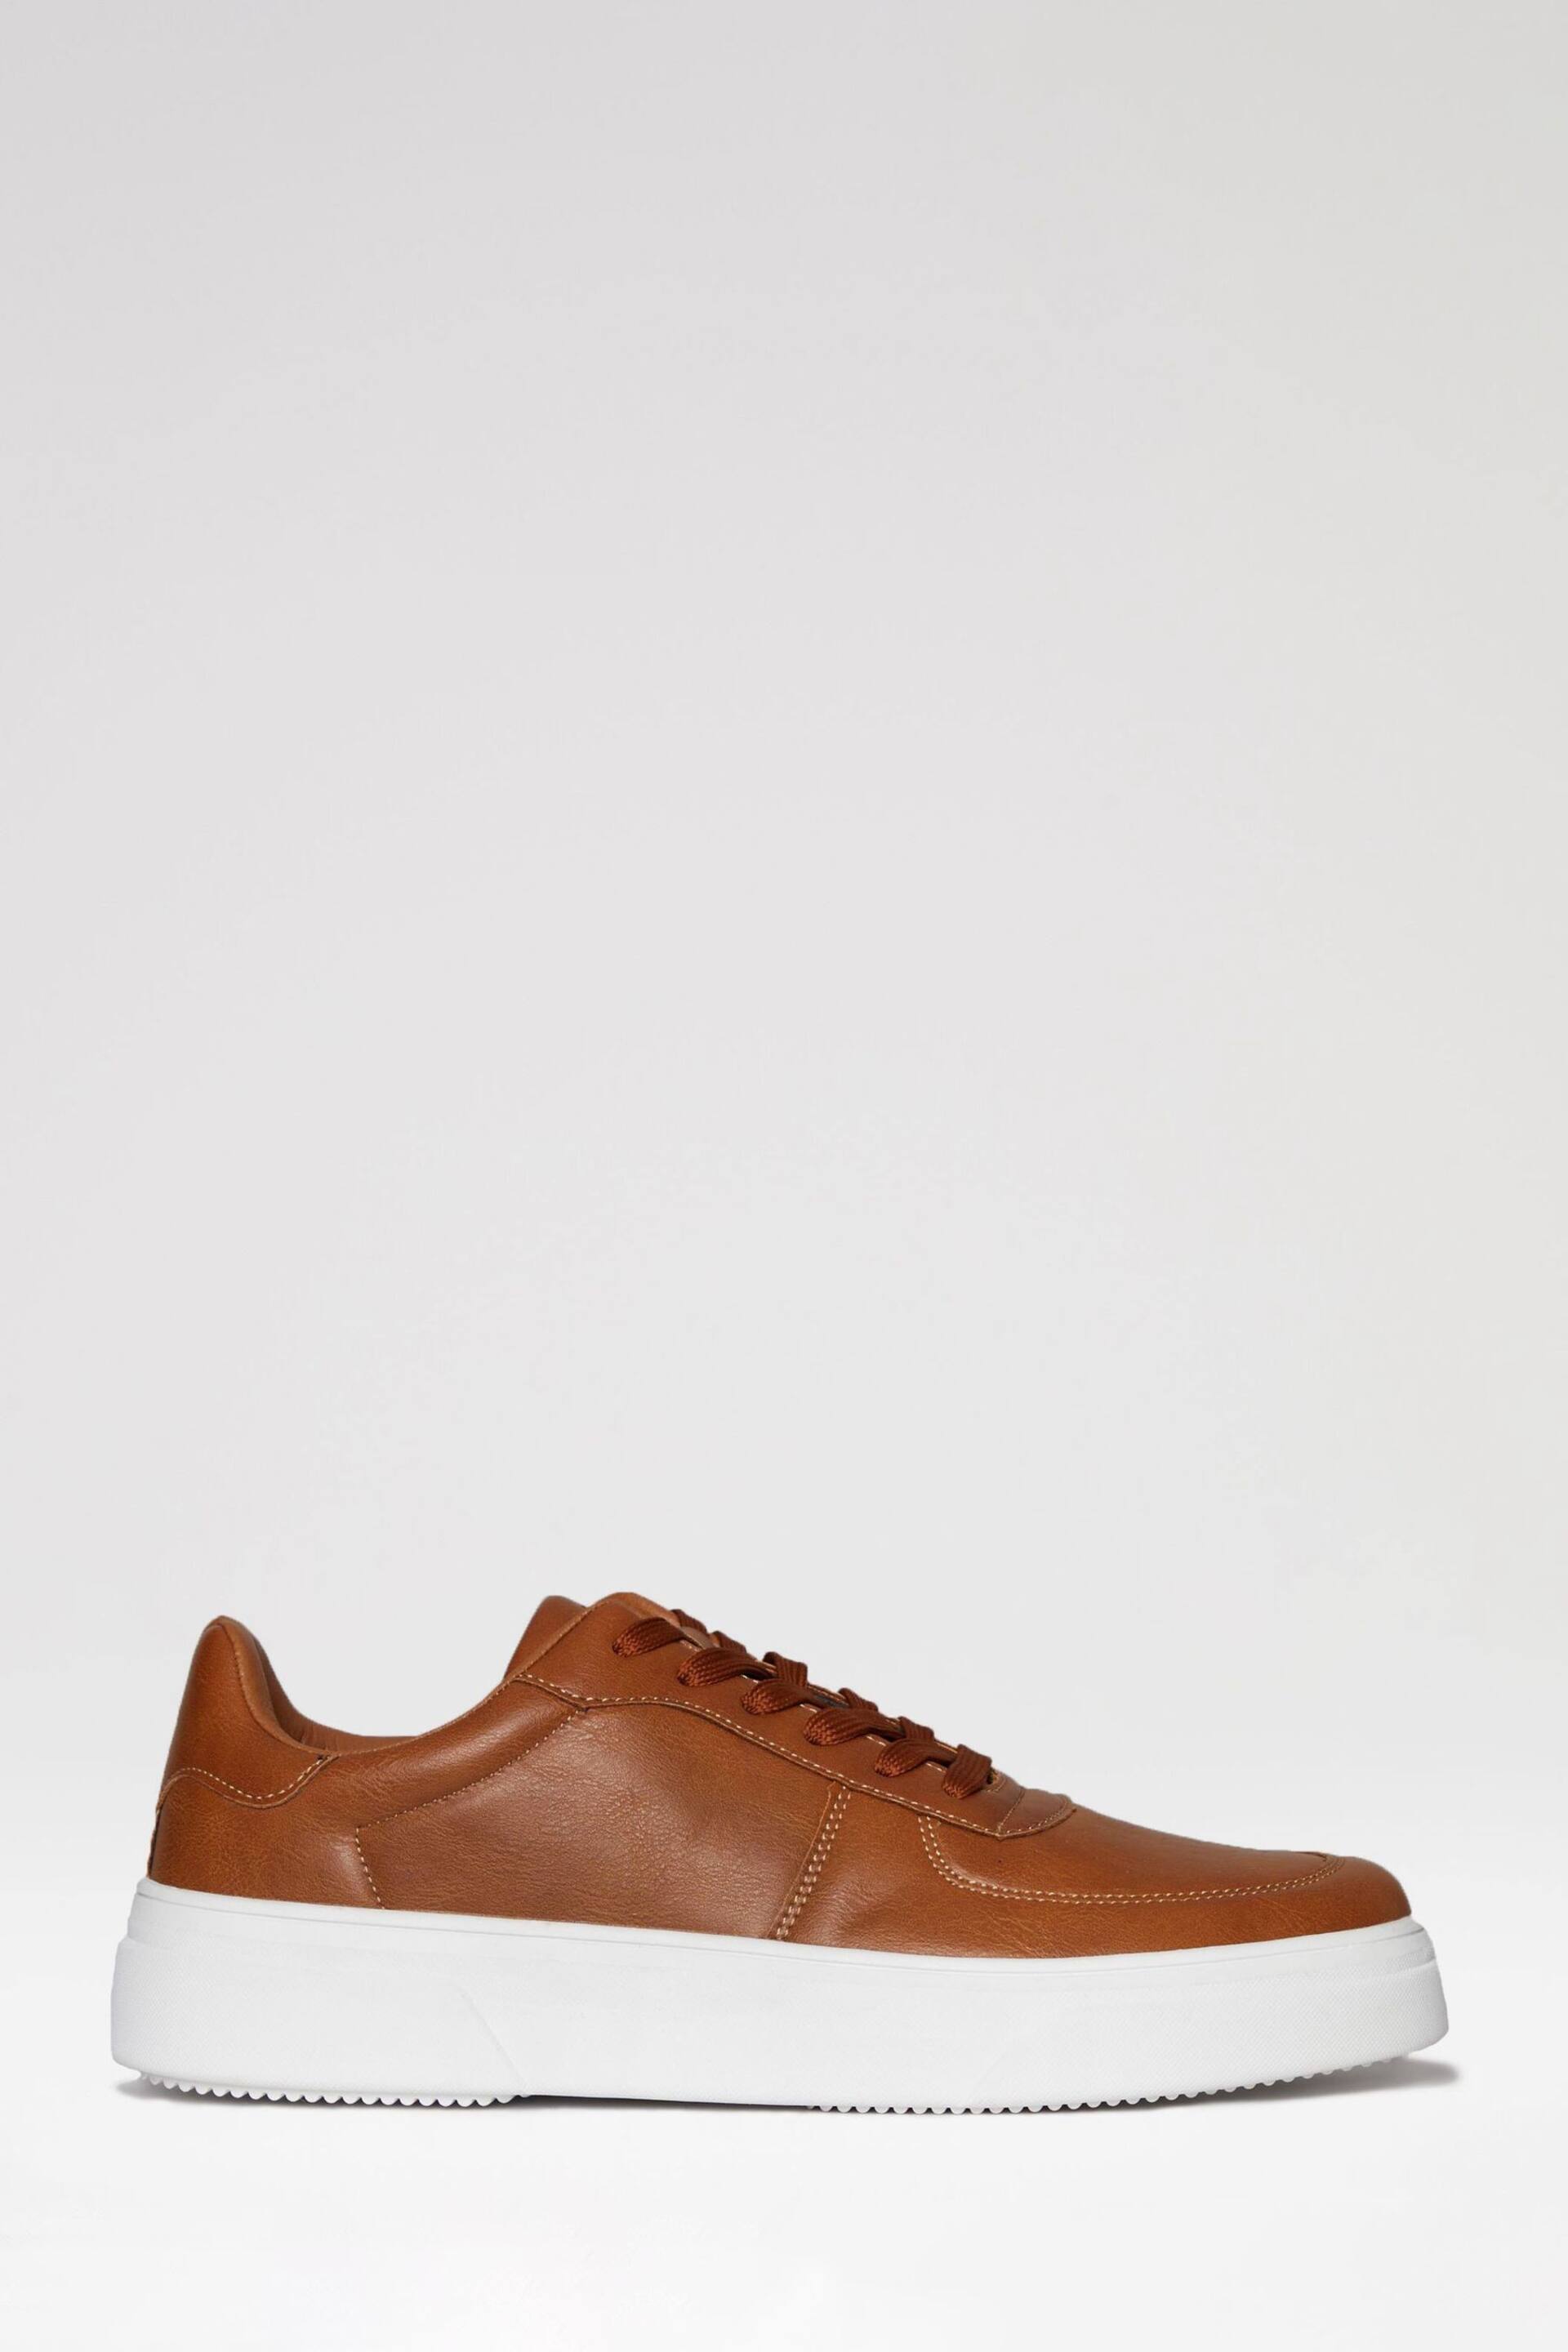 Threadbare Brown Casual Raised Sole Trainers - Image 1 of 4